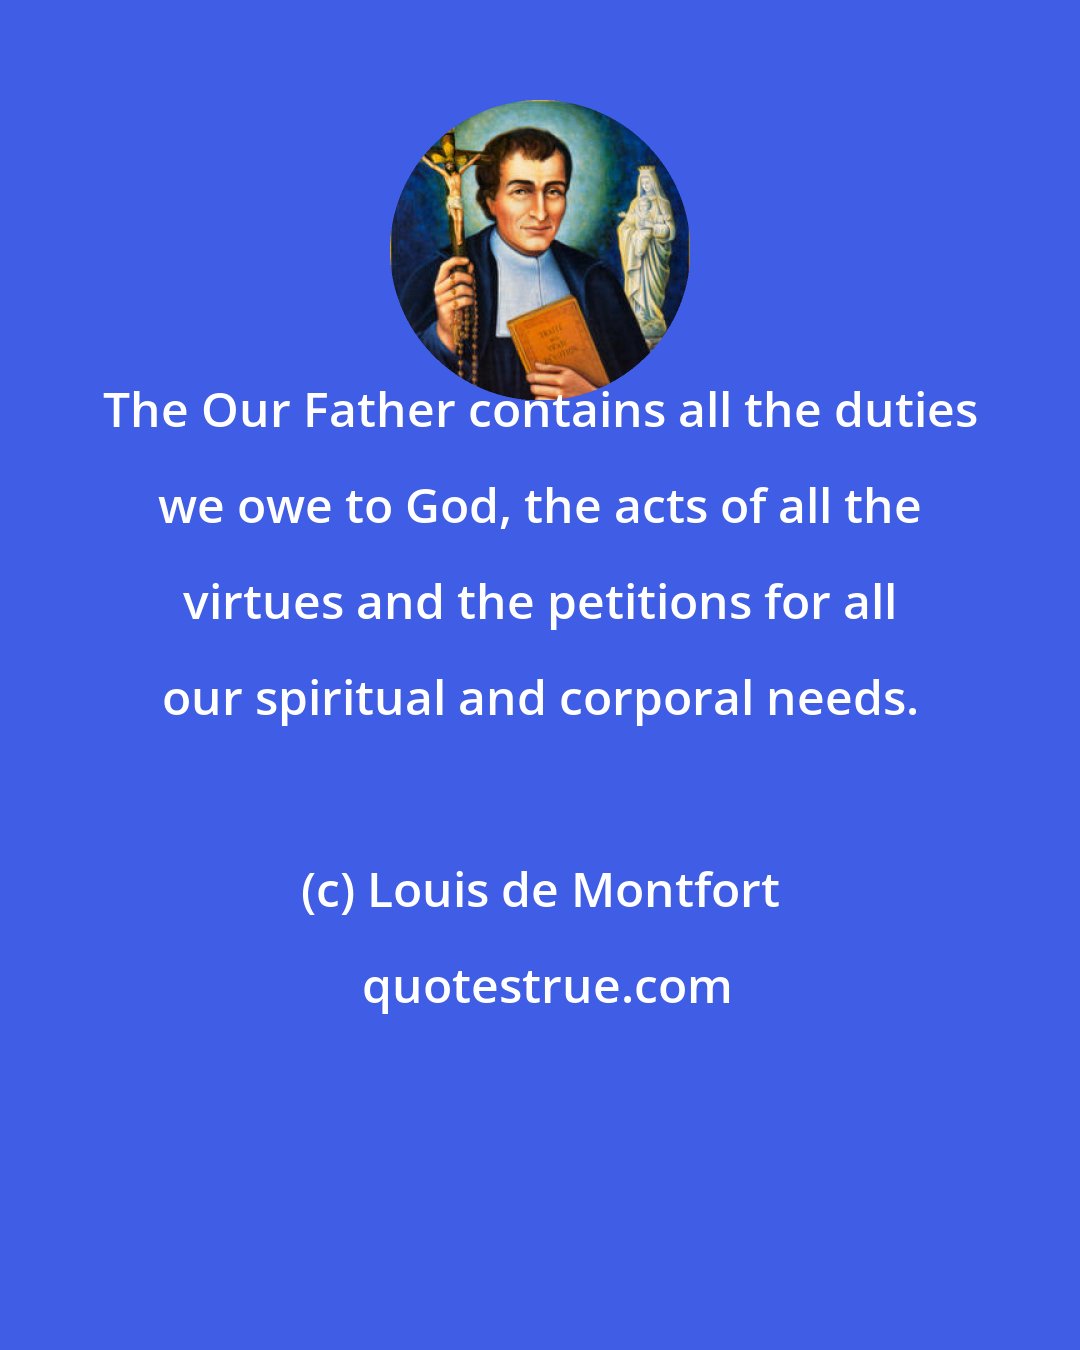 Louis de Montfort: The Our Father contains all the duties we owe to God, the acts of all the virtues and the petitions for all our spiritual and corporal needs.